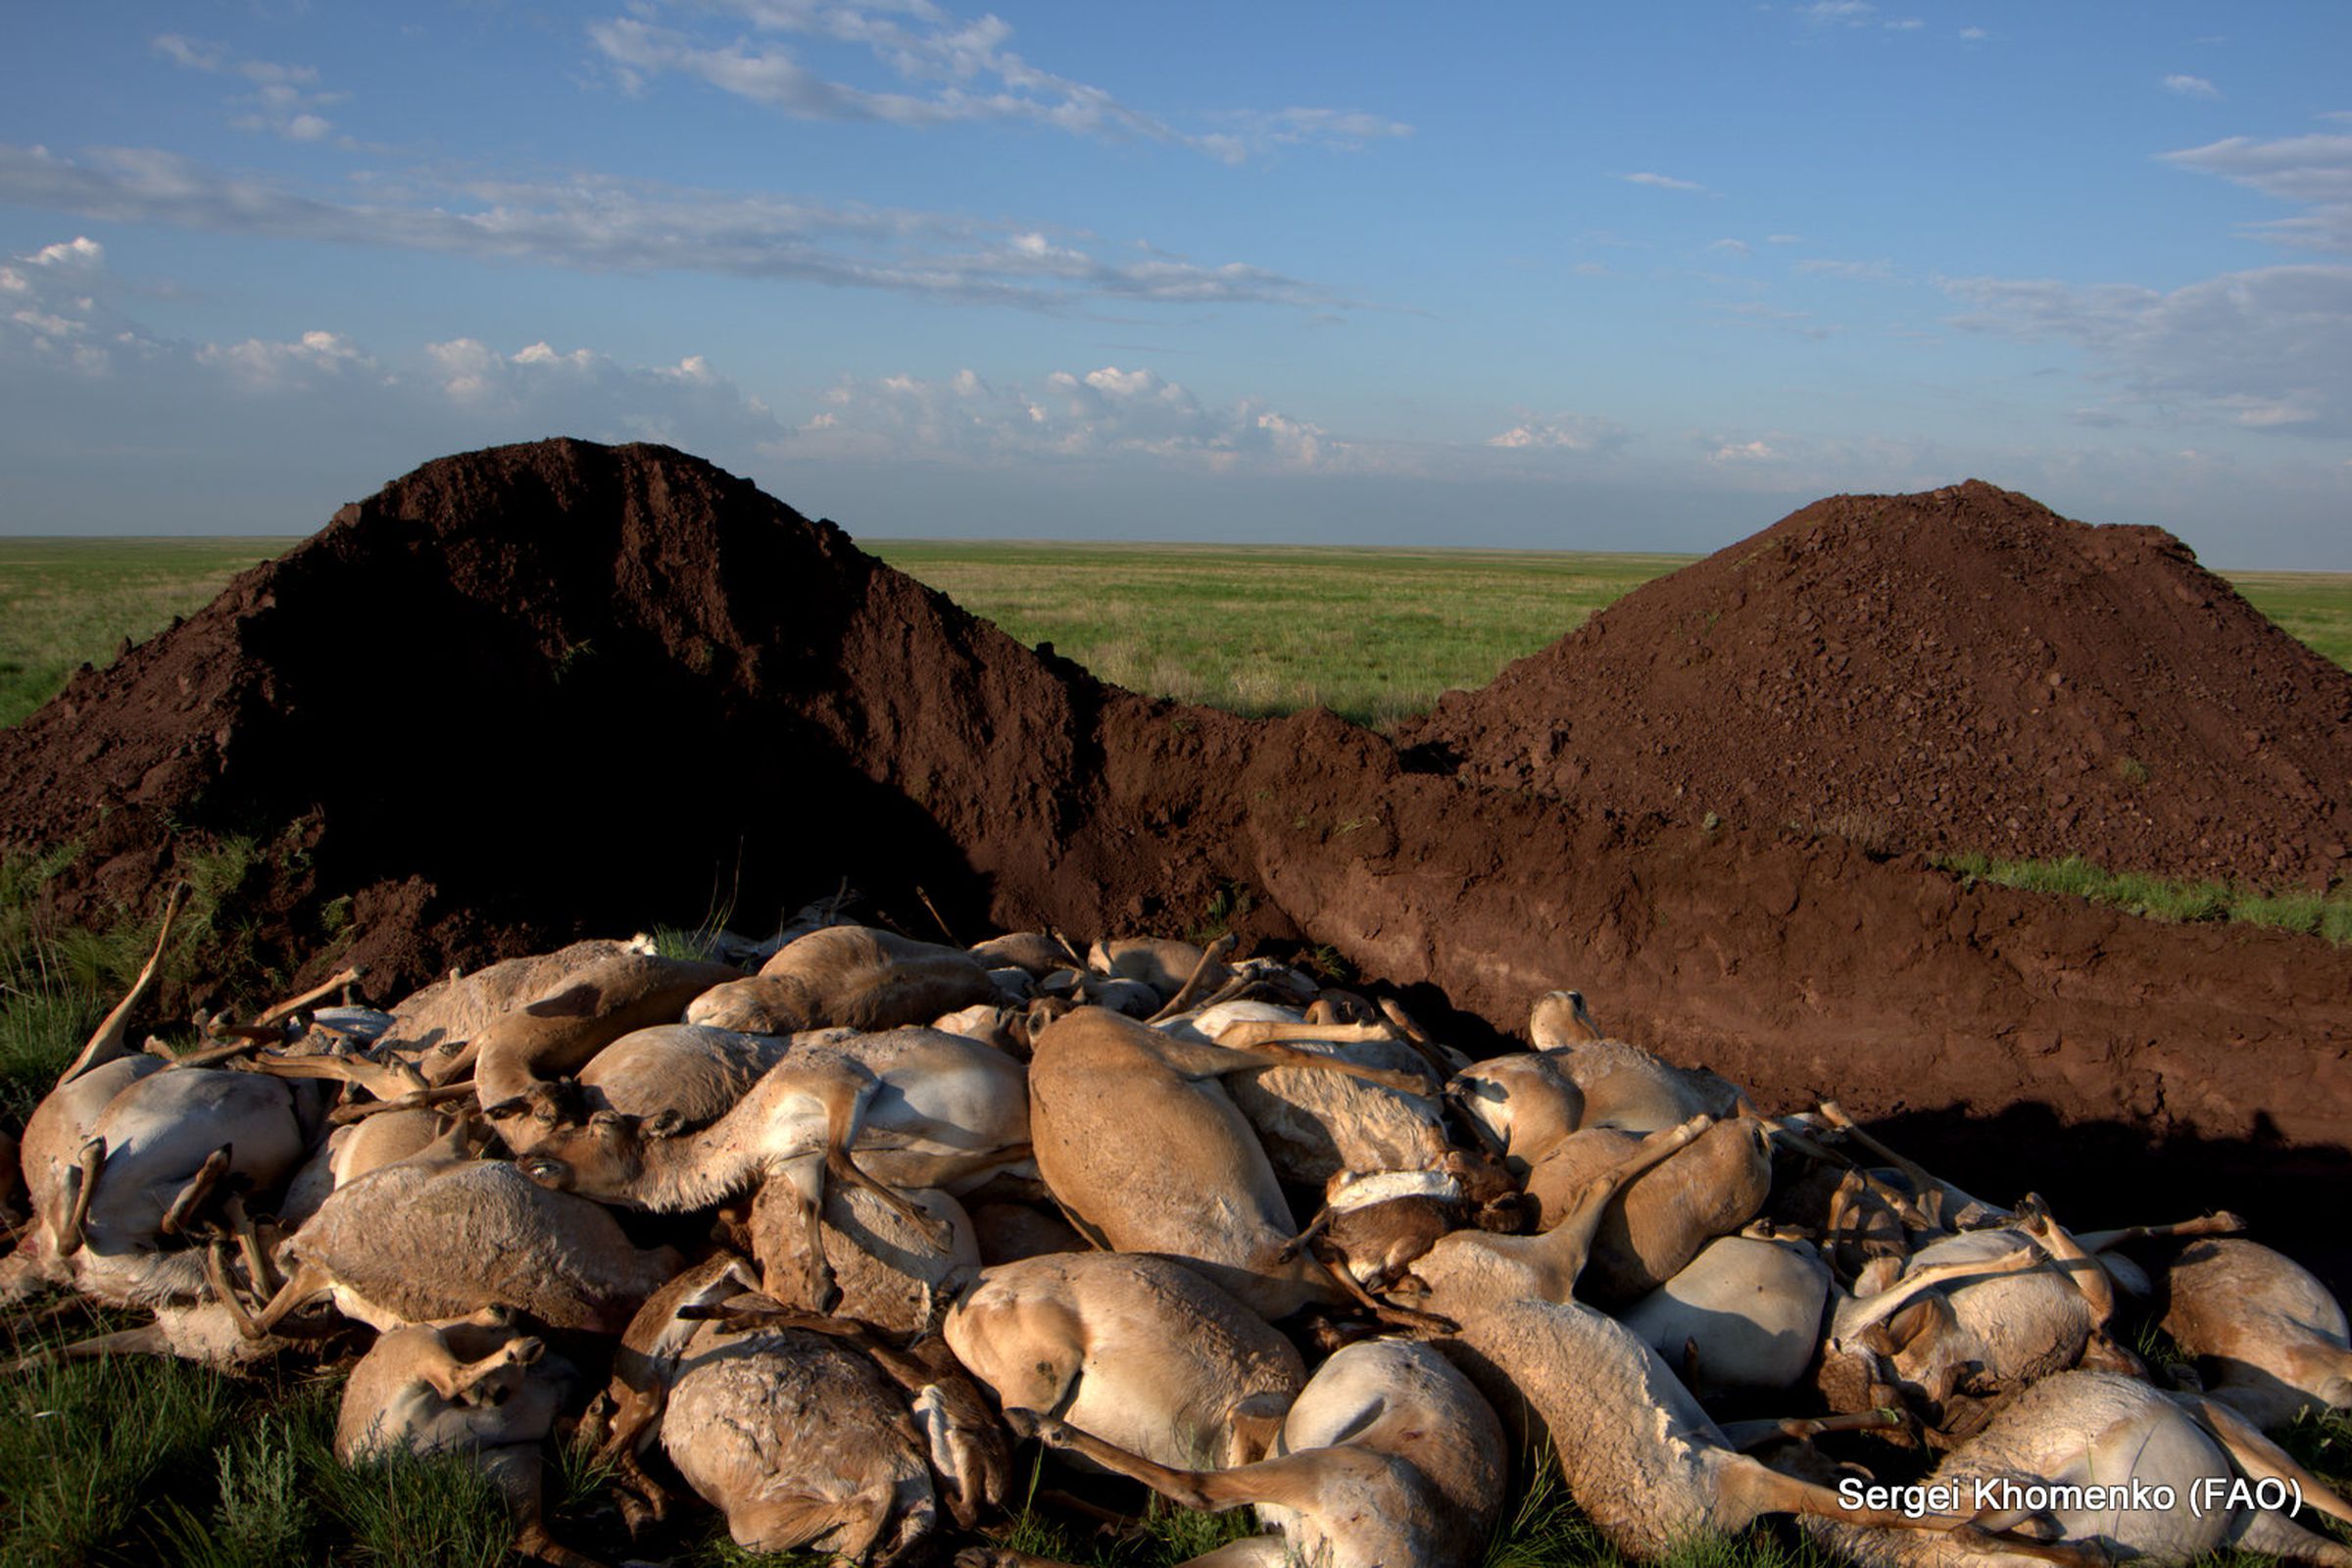 A burial ground for dead saiga antelopes in Kazakhstan, in 2015.